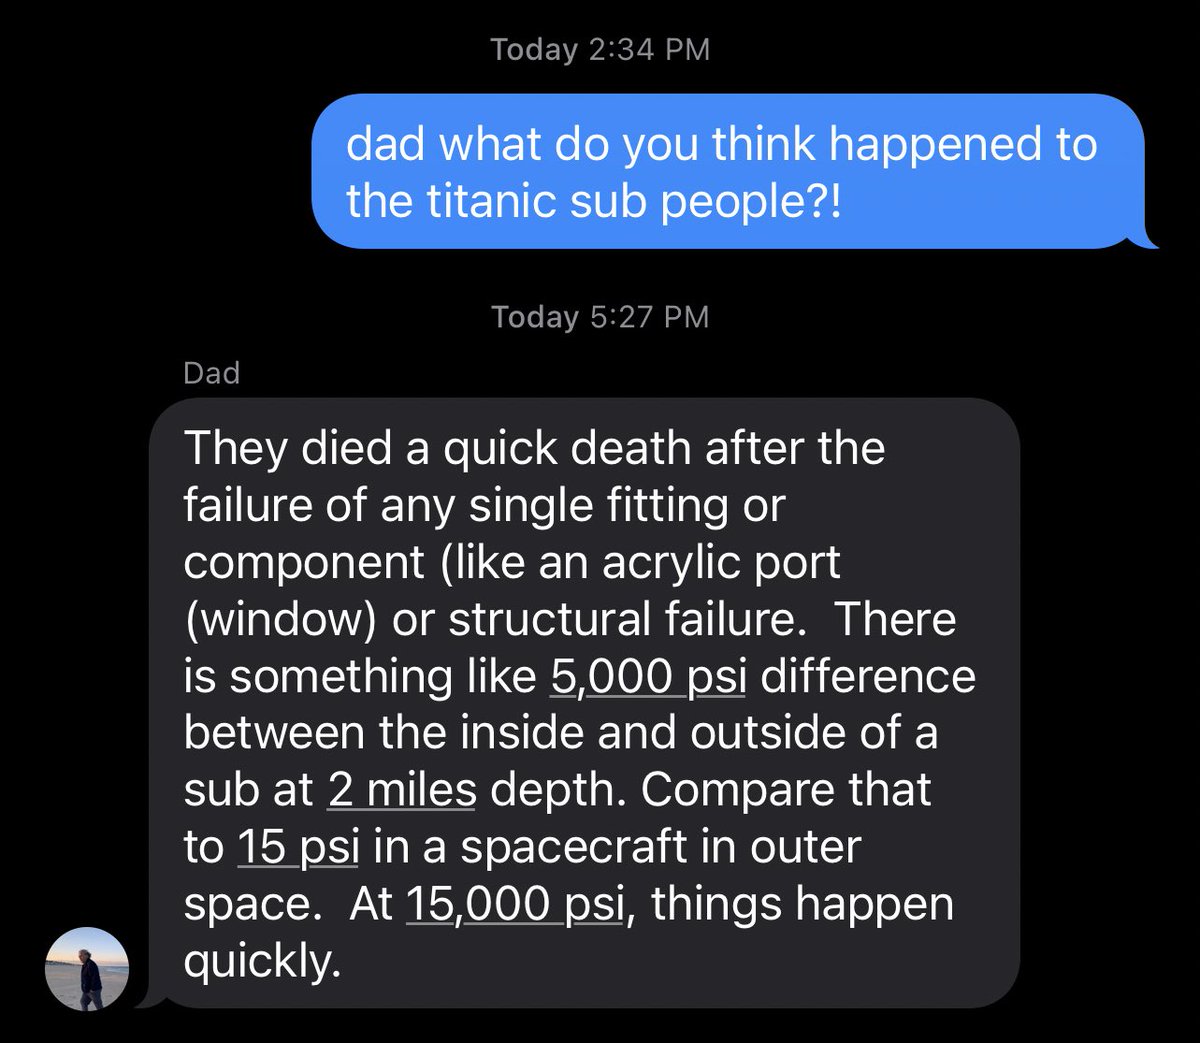 had to check in with dad on the titanic situation. one thing about chief engineers is they're gonna get right to the point lmao